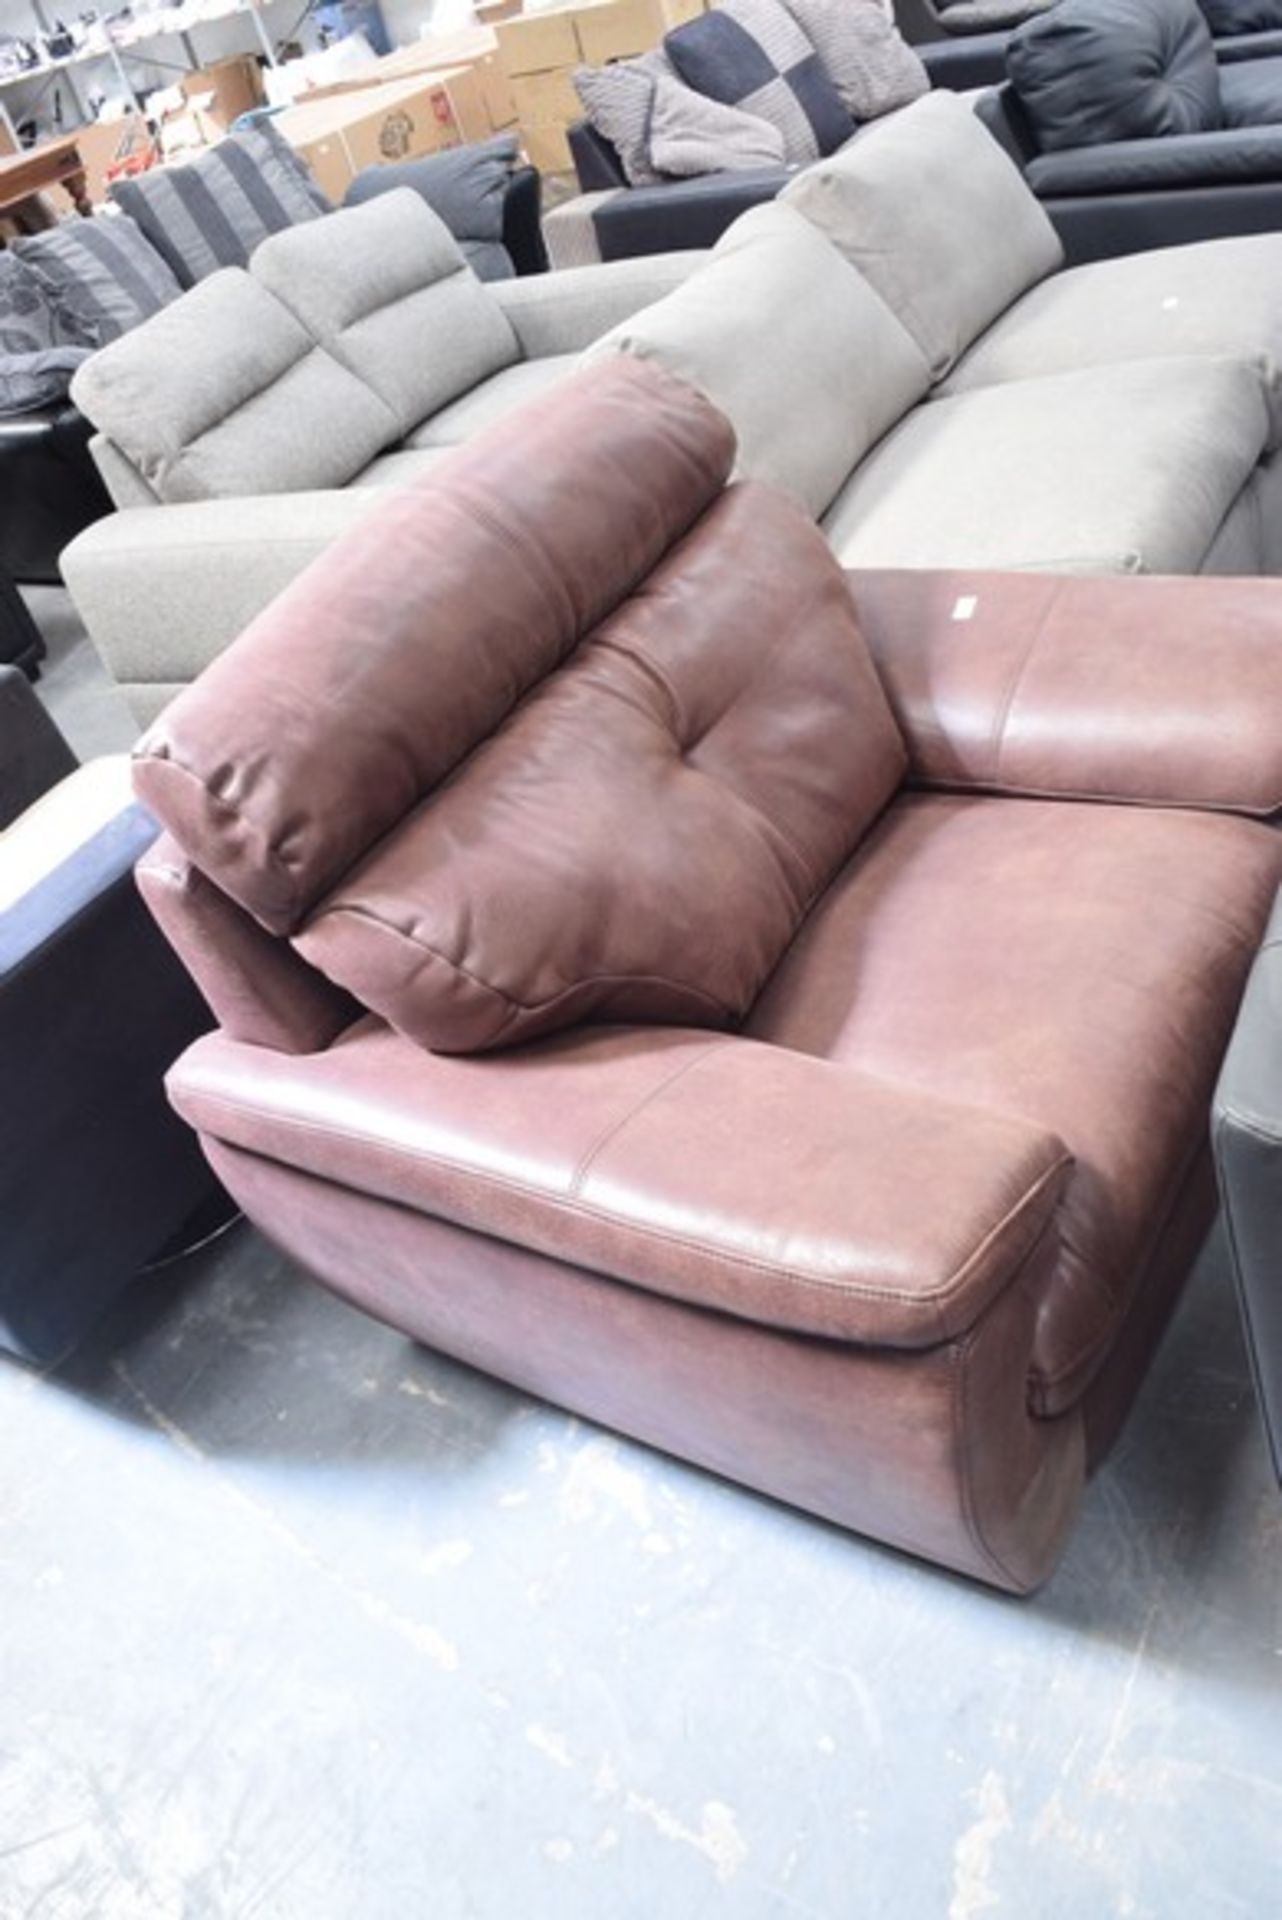 1 x SINGLE BROWN FAUX LEATHER ARM CHAIR RRP £200 17.05.17 *PLEASE NOTE THAT THE BID PRICE IS